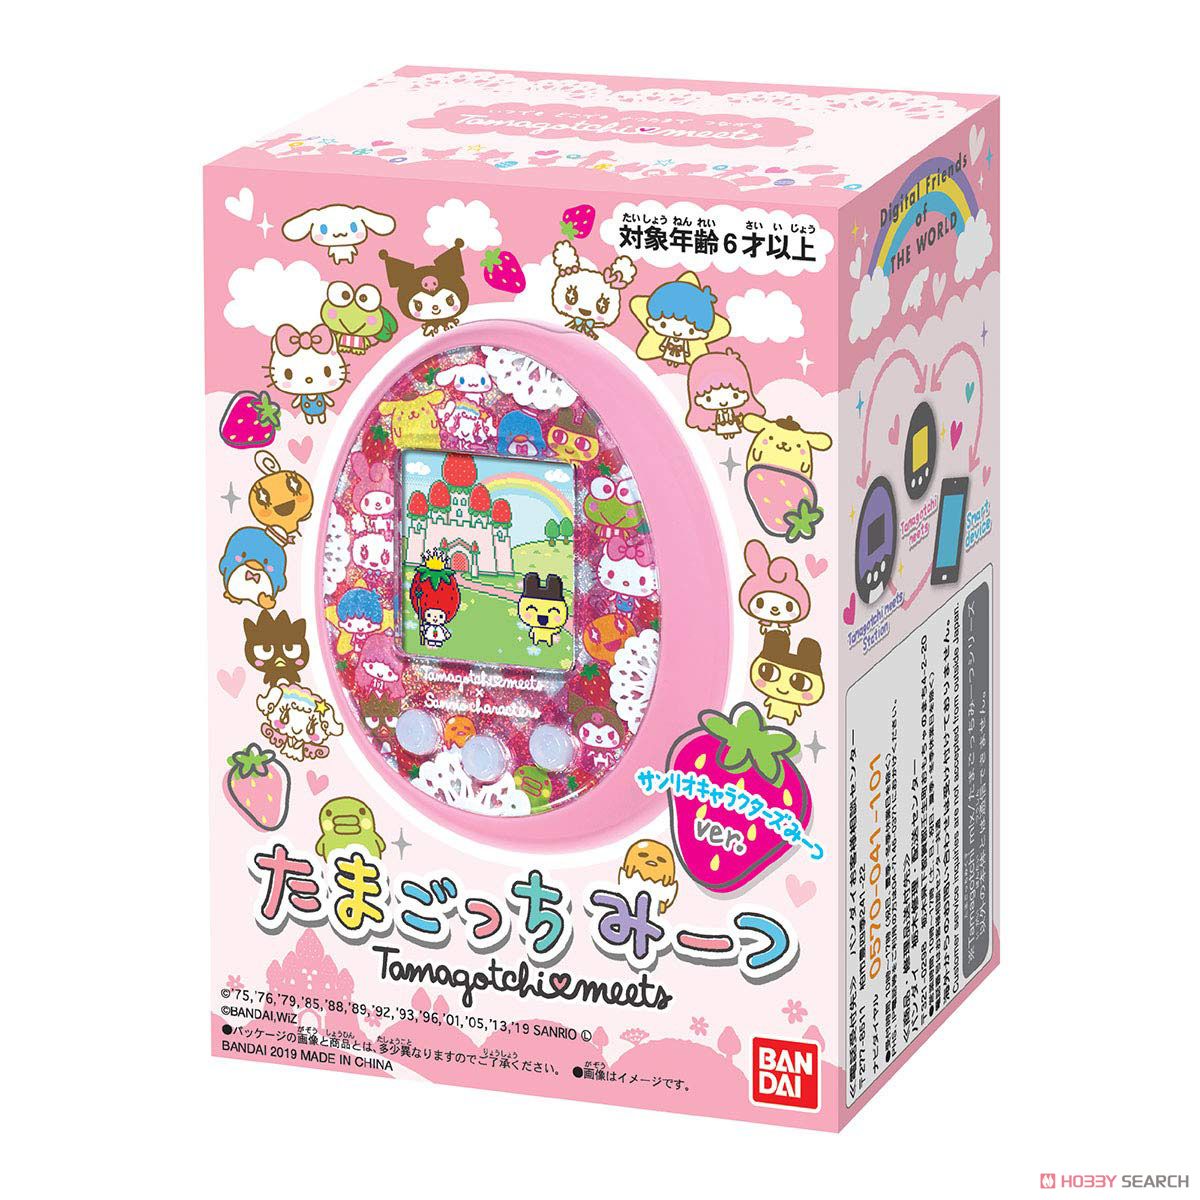 Tamagotchi meets Sanrio Characters meets Ver. (Electronic Toy) Package1